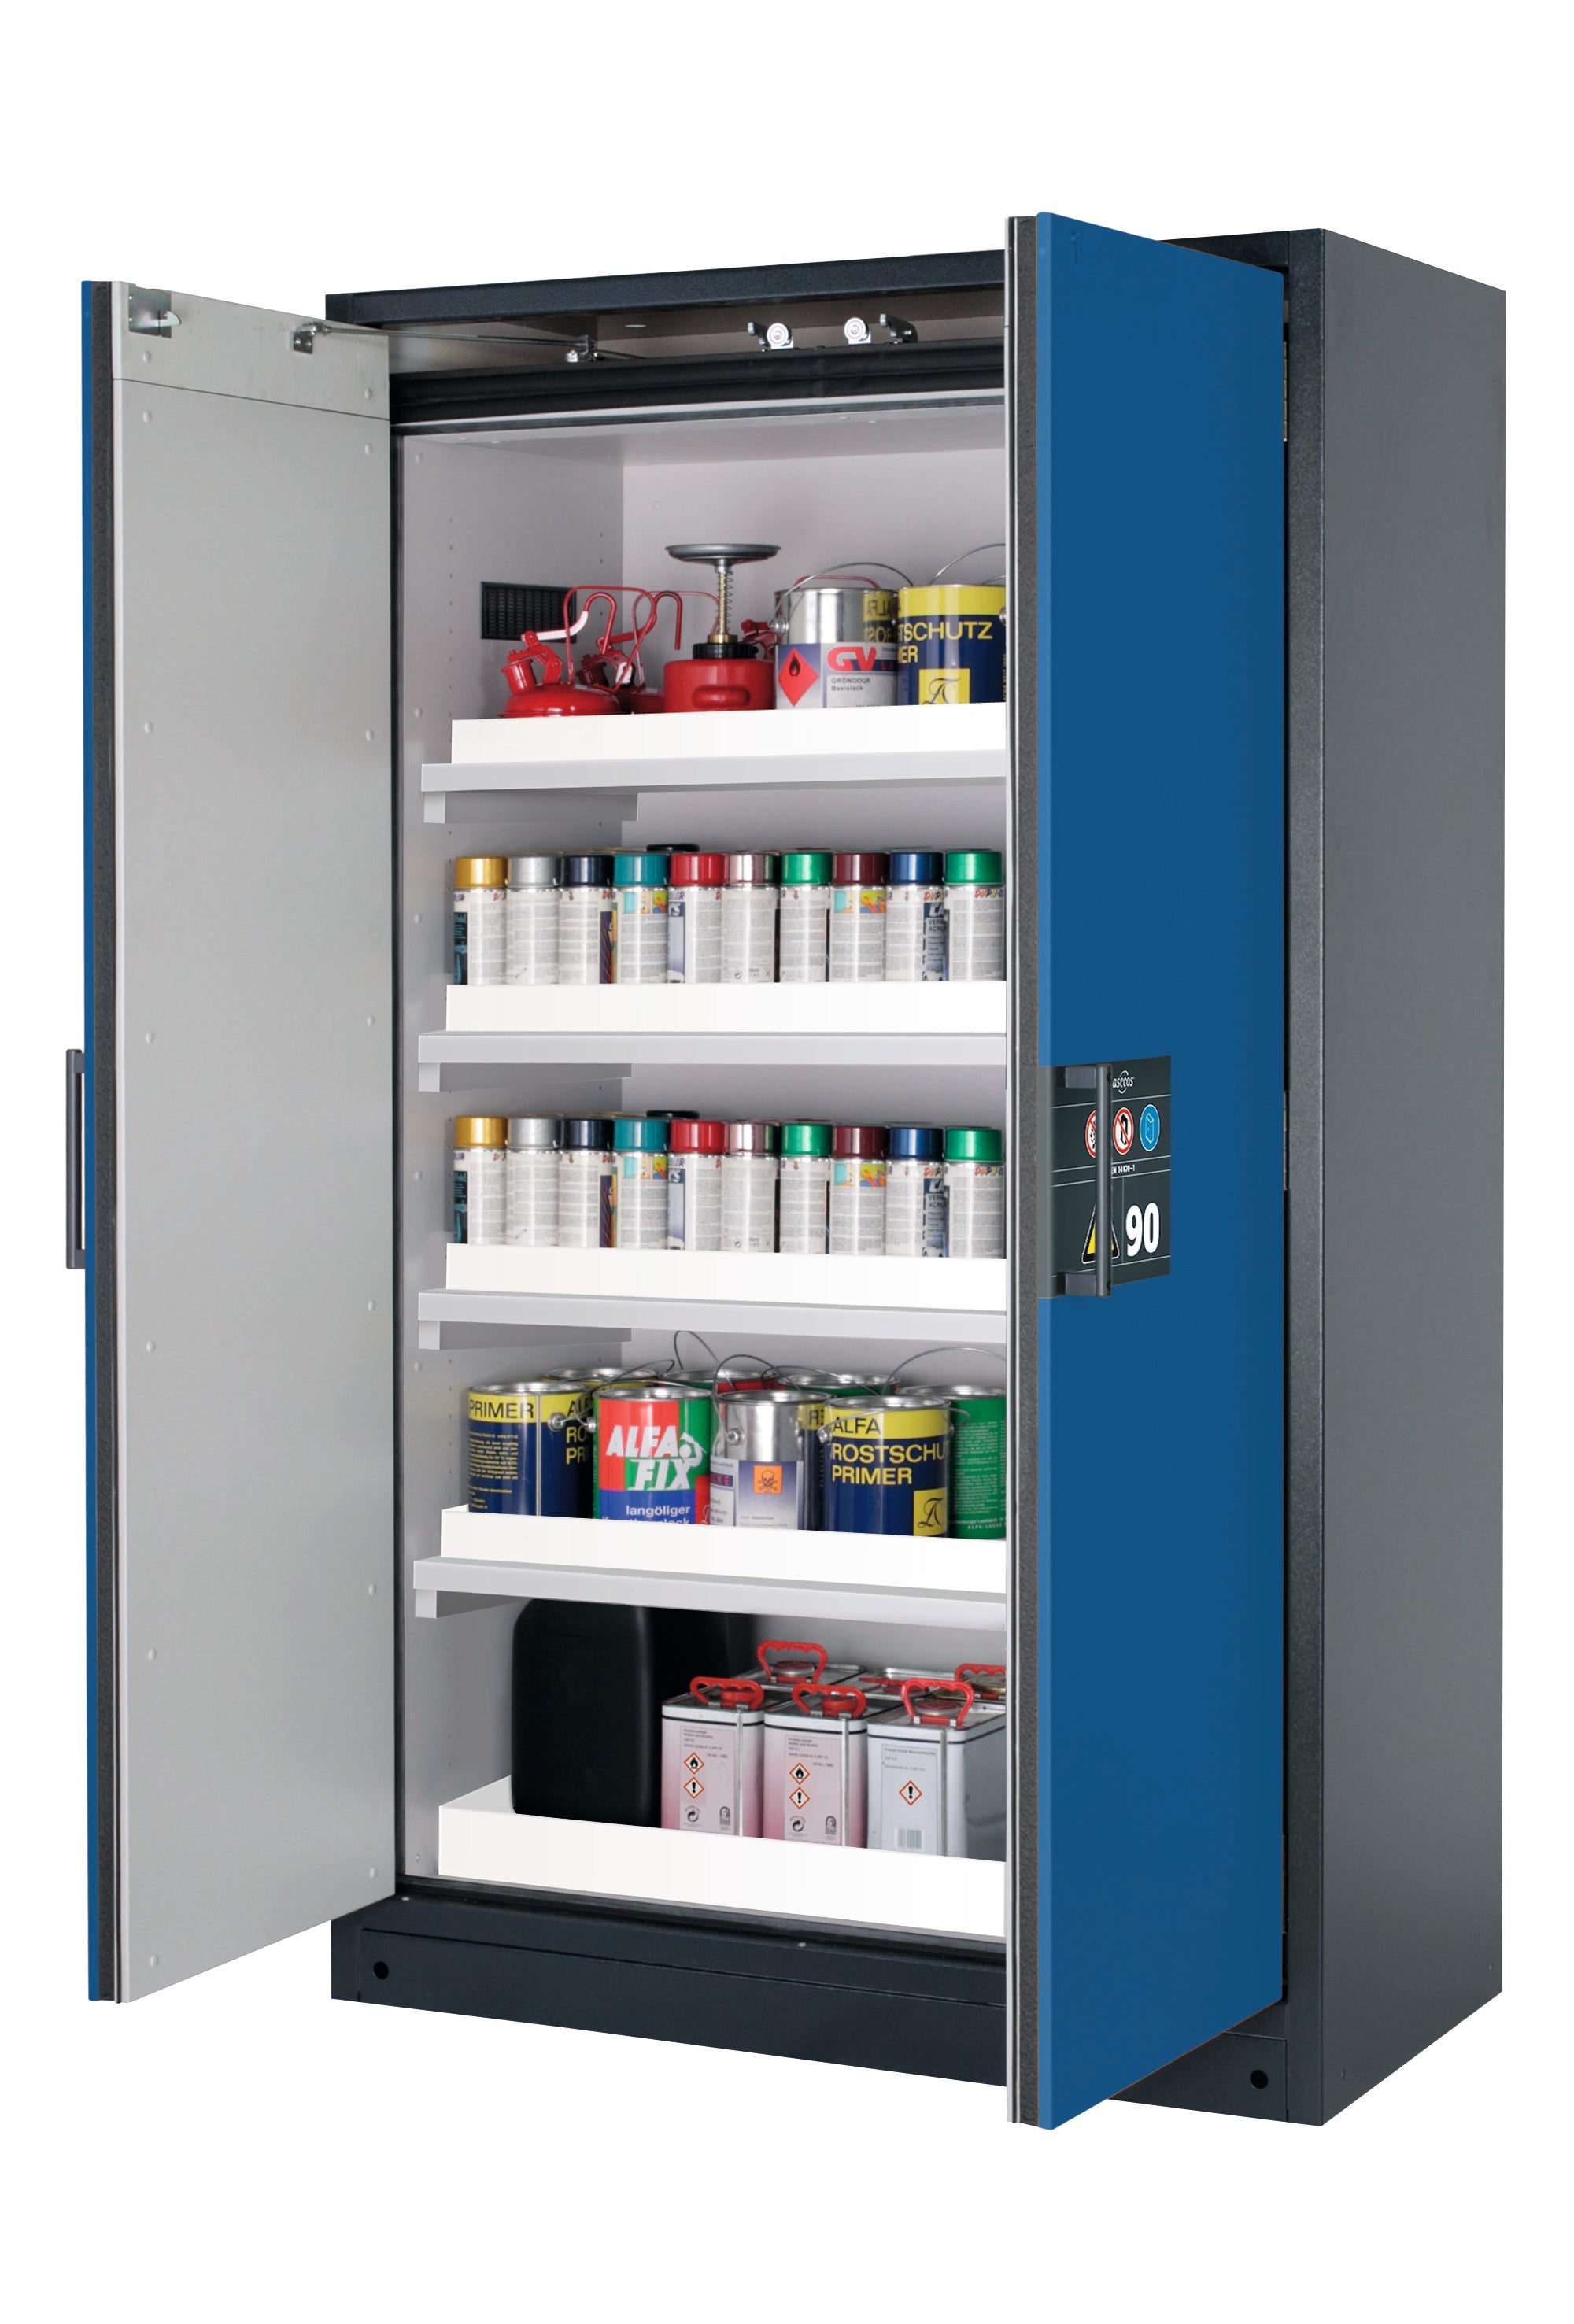 Type 90 safety storage cabinet Q-CLASSIC-90 model Q90.195.120 in gentian blue RAL 5010 with 4x tray shelf (standard) (polypropylene),